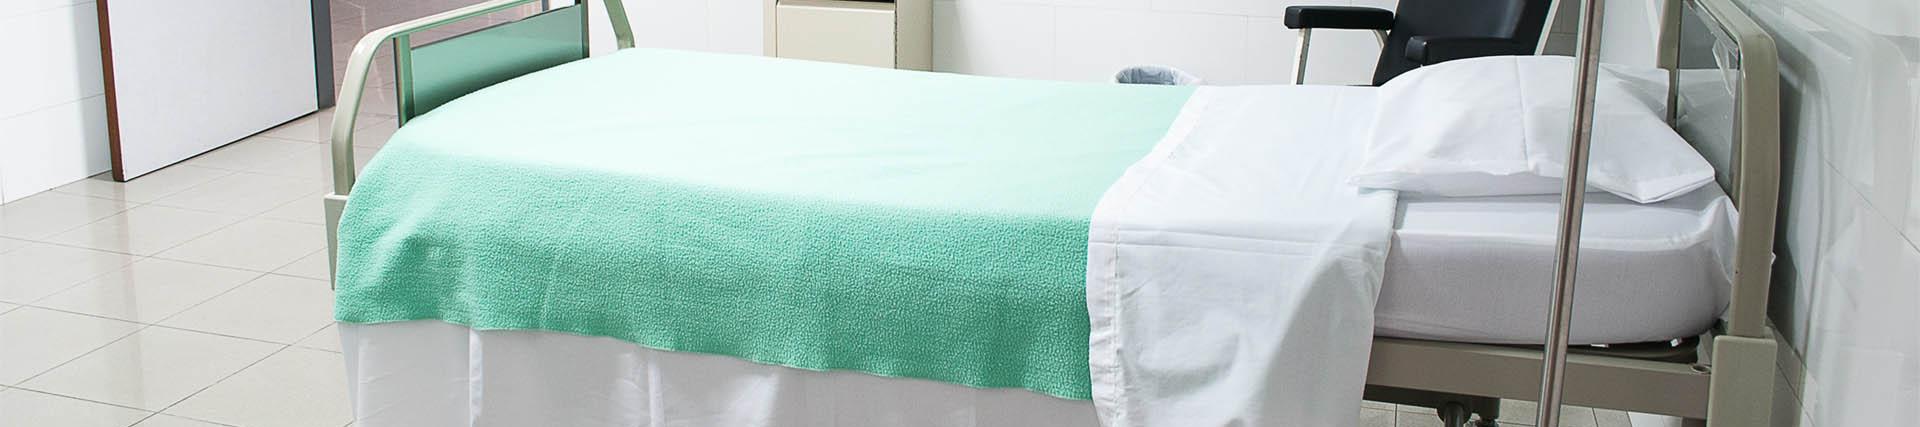 an empty hospital bed with a green blanket on it